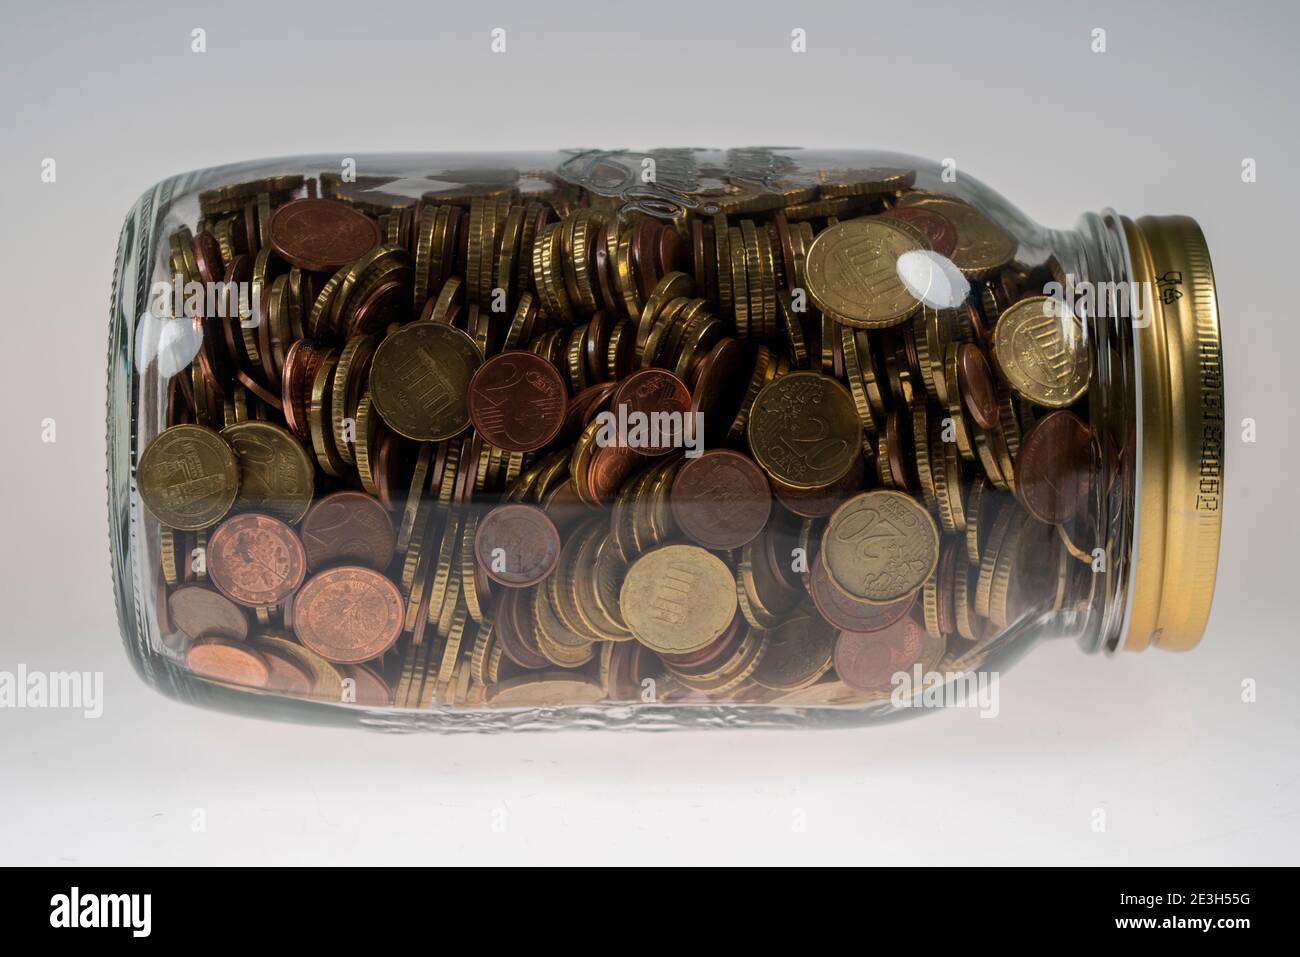 Coins, Euro coins, cent coins, one cent, two cent, five cent, ten cent, twenty cent, fifty cent, money coins, collected in a storage jar, Stock Photo